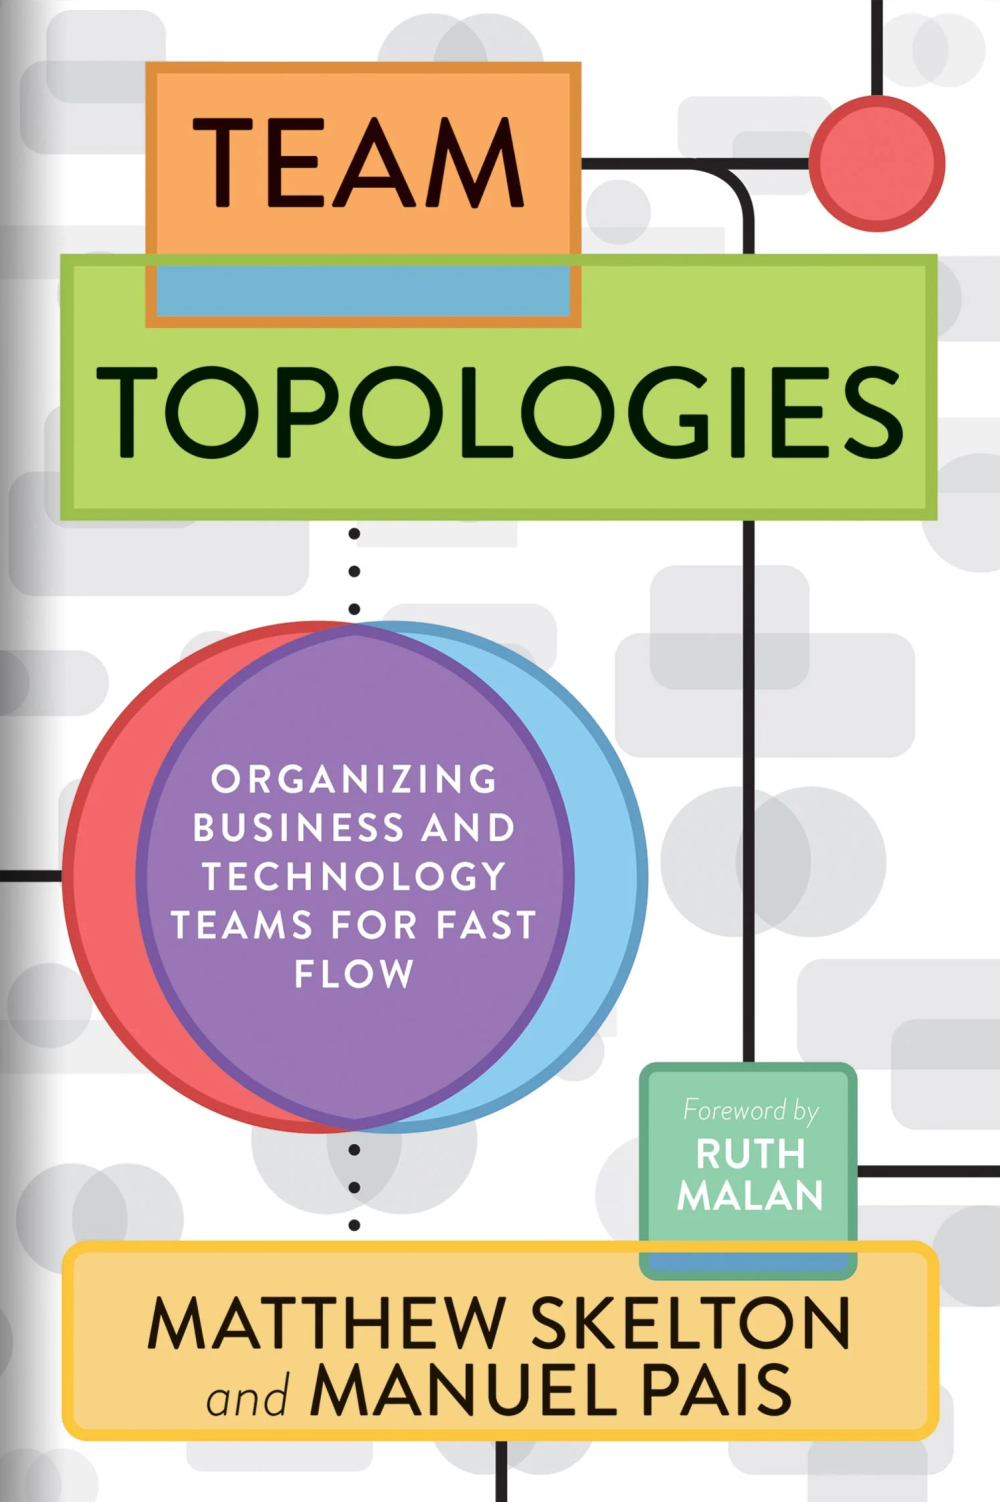 Team Topologies has a cover arranged like parts of a flow chart in many colors